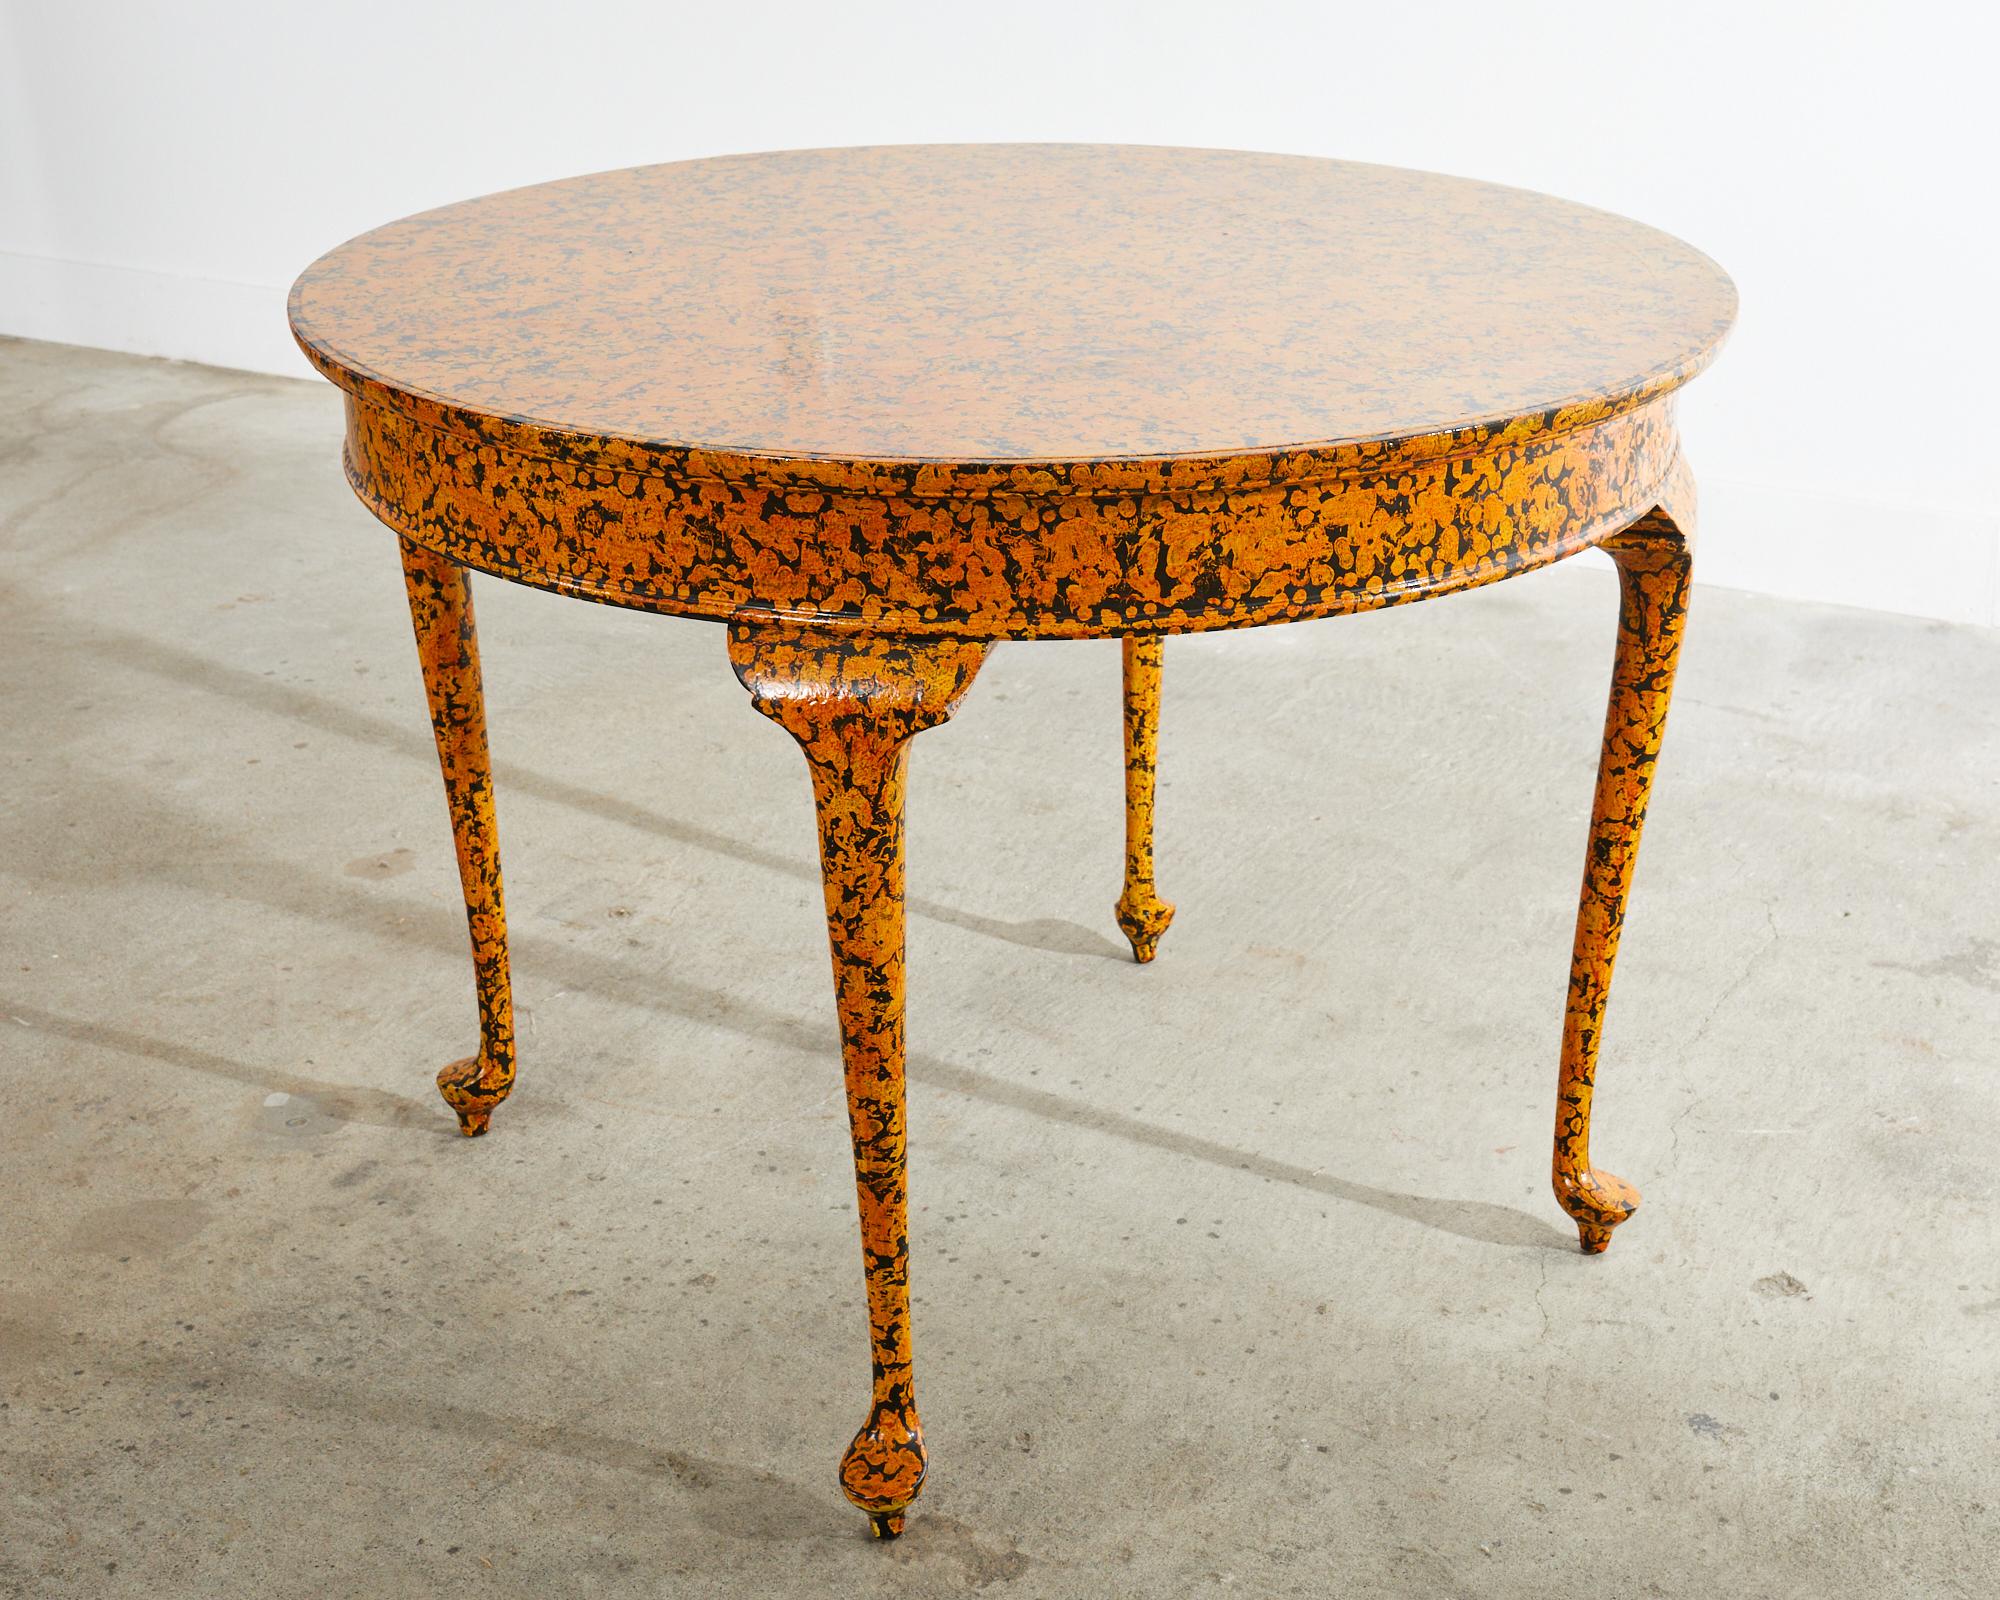 English Queen Anne Style Round Dining Table Speckled by Ira Yeager